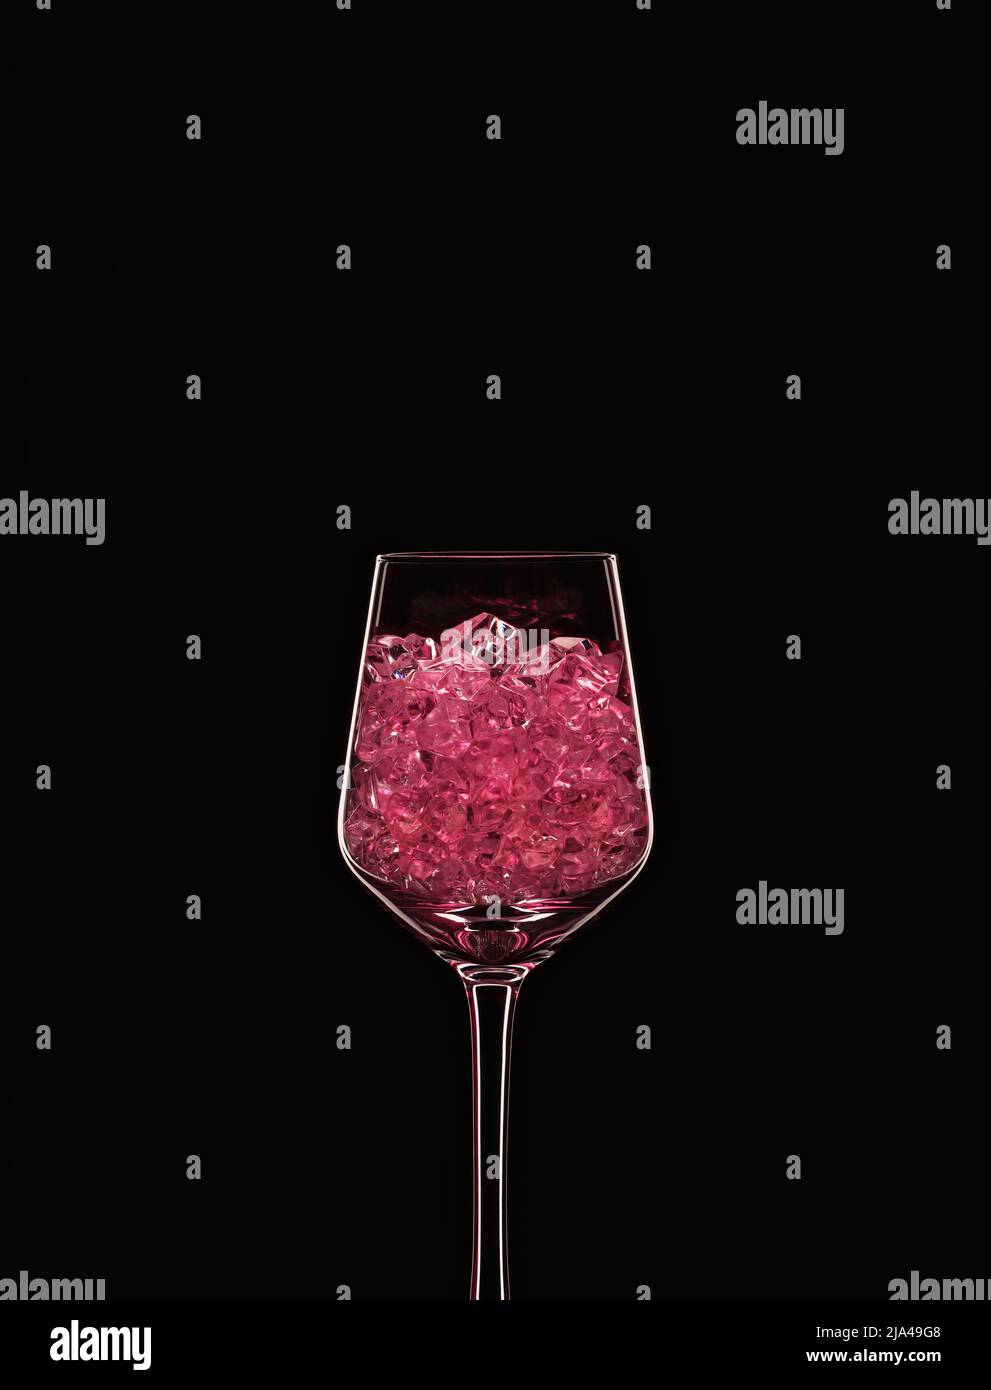 Wine glass filled with transparent pink crystals backlit and isolated on black background. Beverage glassware concept. Copy space. Stock Photo